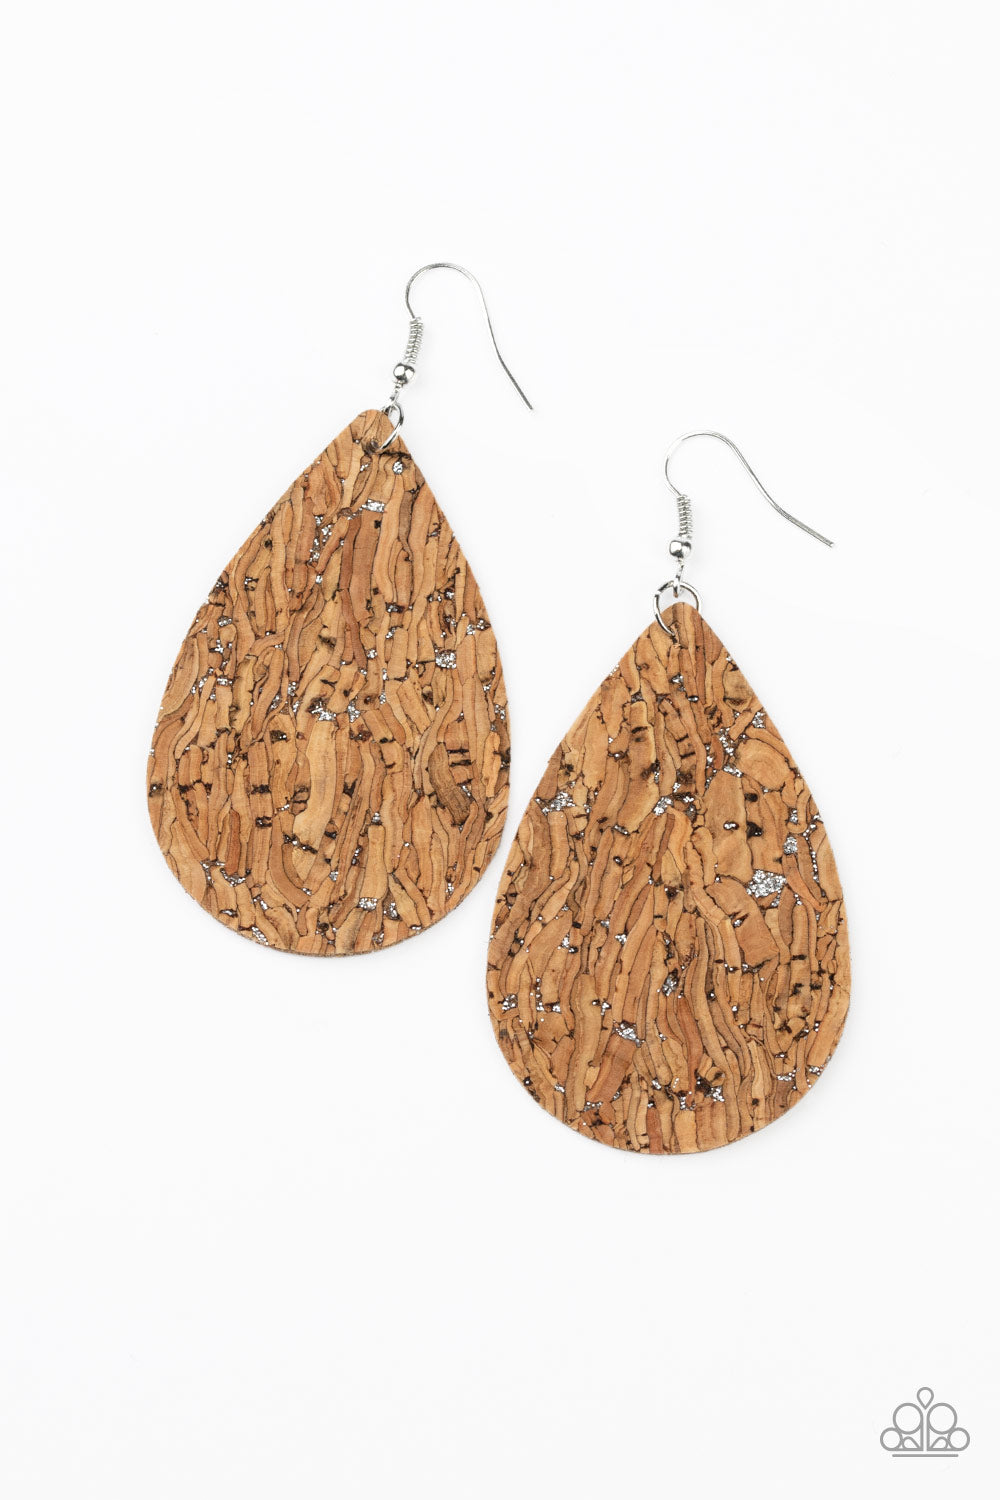 CORK It Over - Silver Item #JJG-E254 Flecked in silver, a cork-like teardrop frame swings from the ear for a seasonal look. Earring attaches to a standard fishhook fitting. All Paparazzi Accessories are lead free and nickel free!  Sold as one pair of earrings.